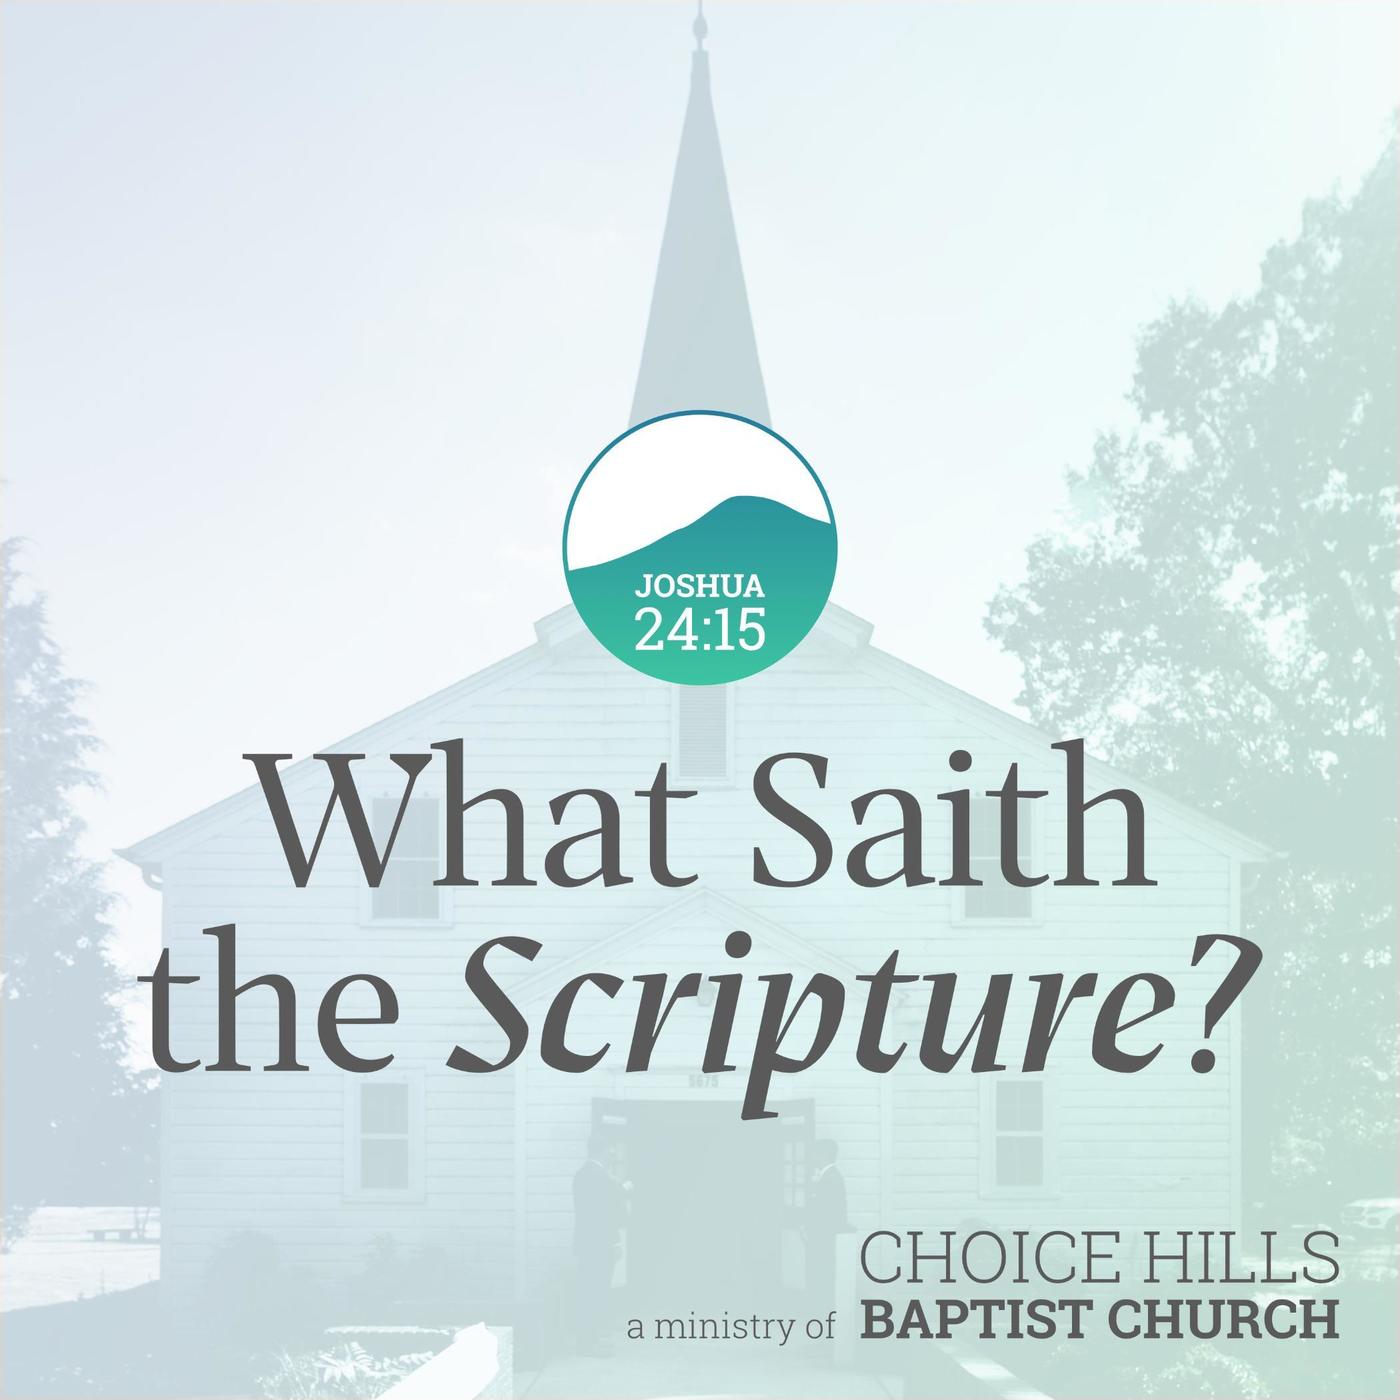 Adult Sunday School: Study of the 119th Psalm (Part 9)